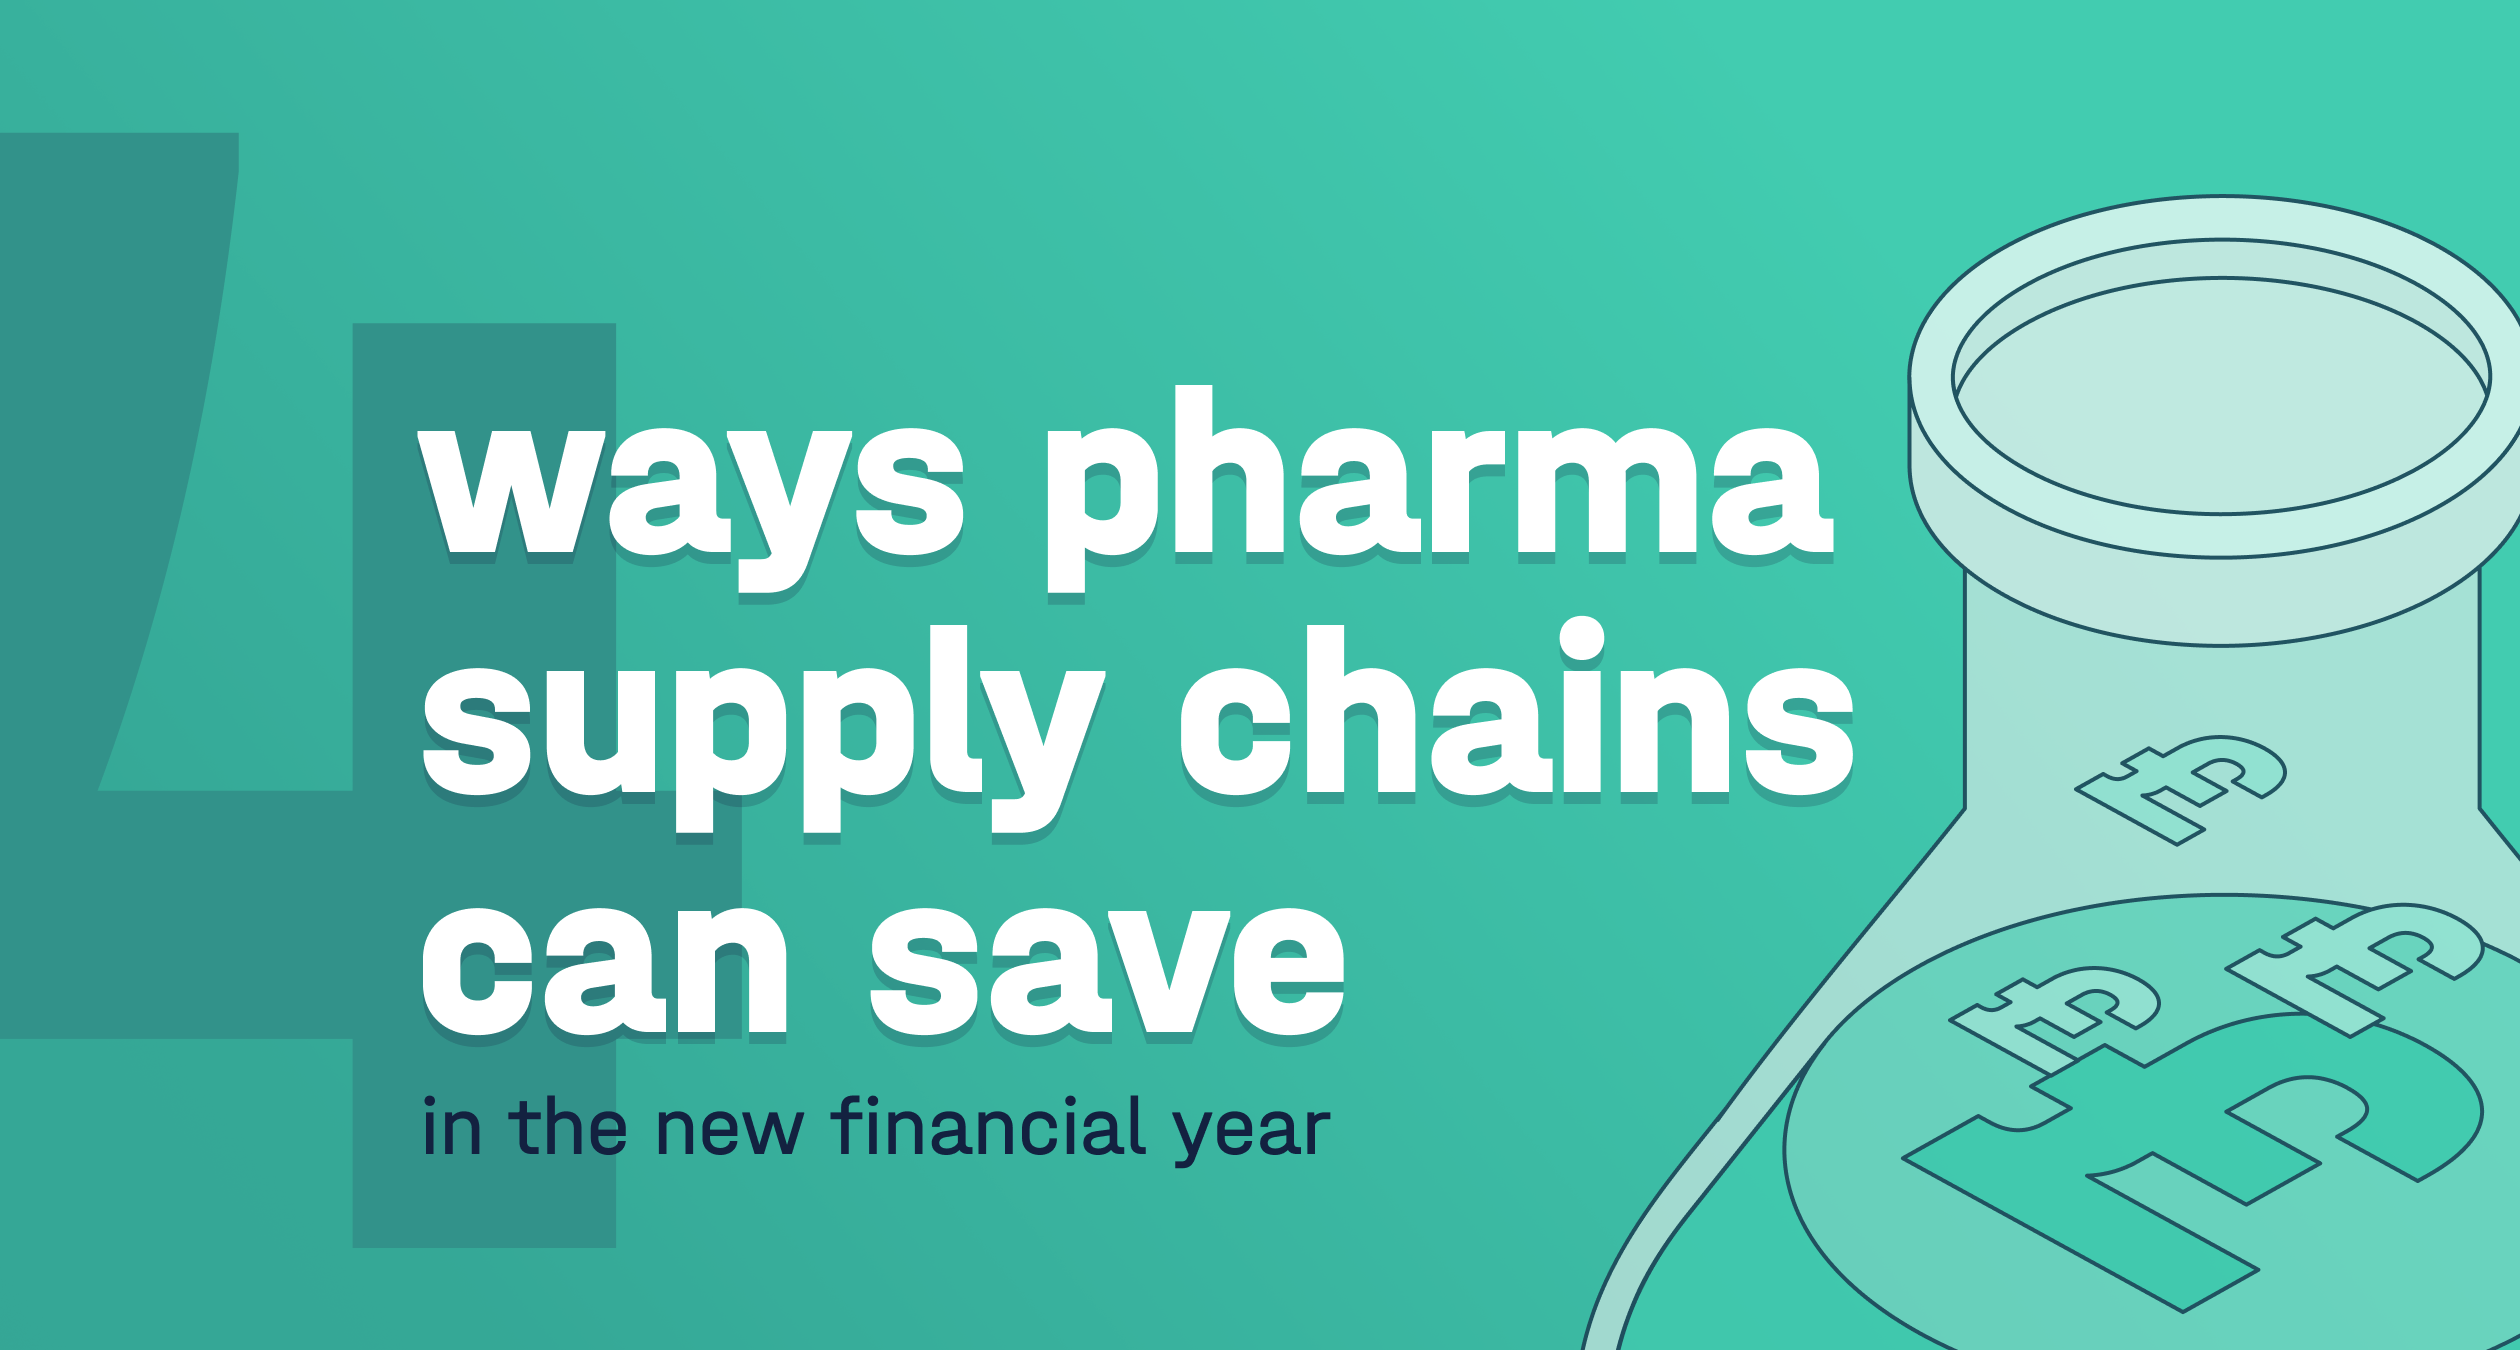 4 ways pharma supply chains can save blog image with beaker